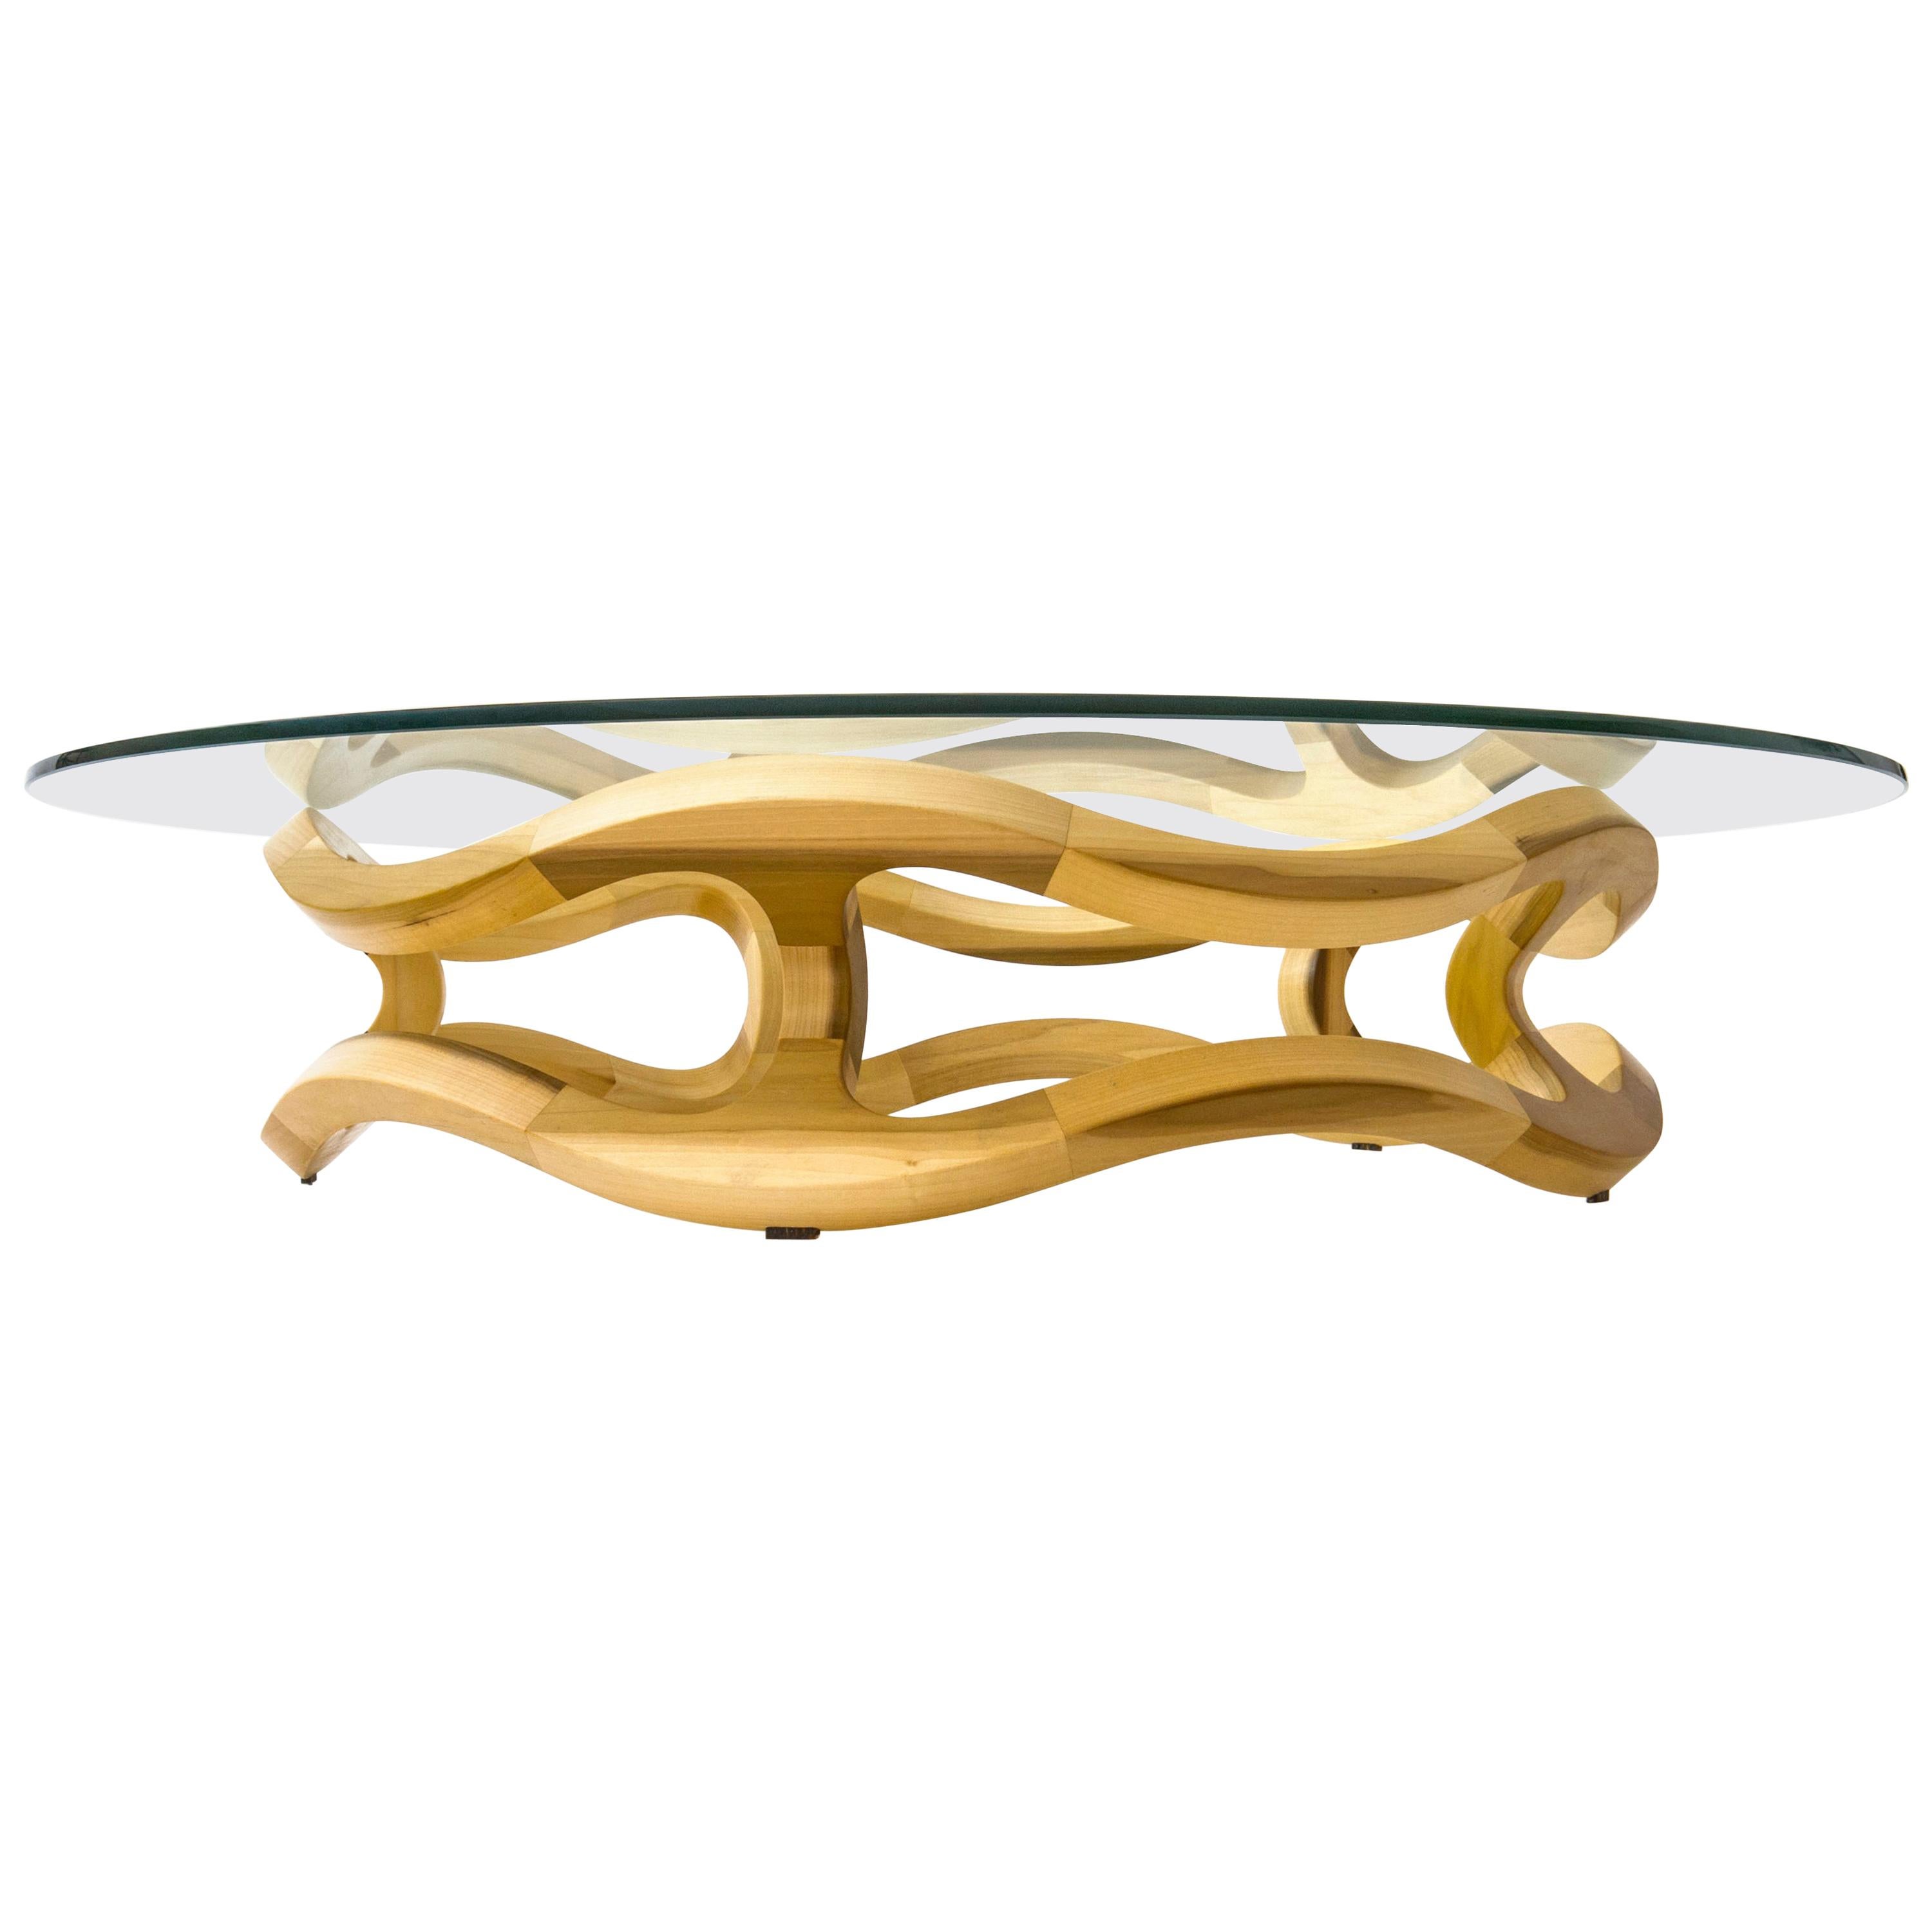 "Flamenca" Contemporary Center Table, Handcrafted in Geometric Poplar Hardwood For Sale